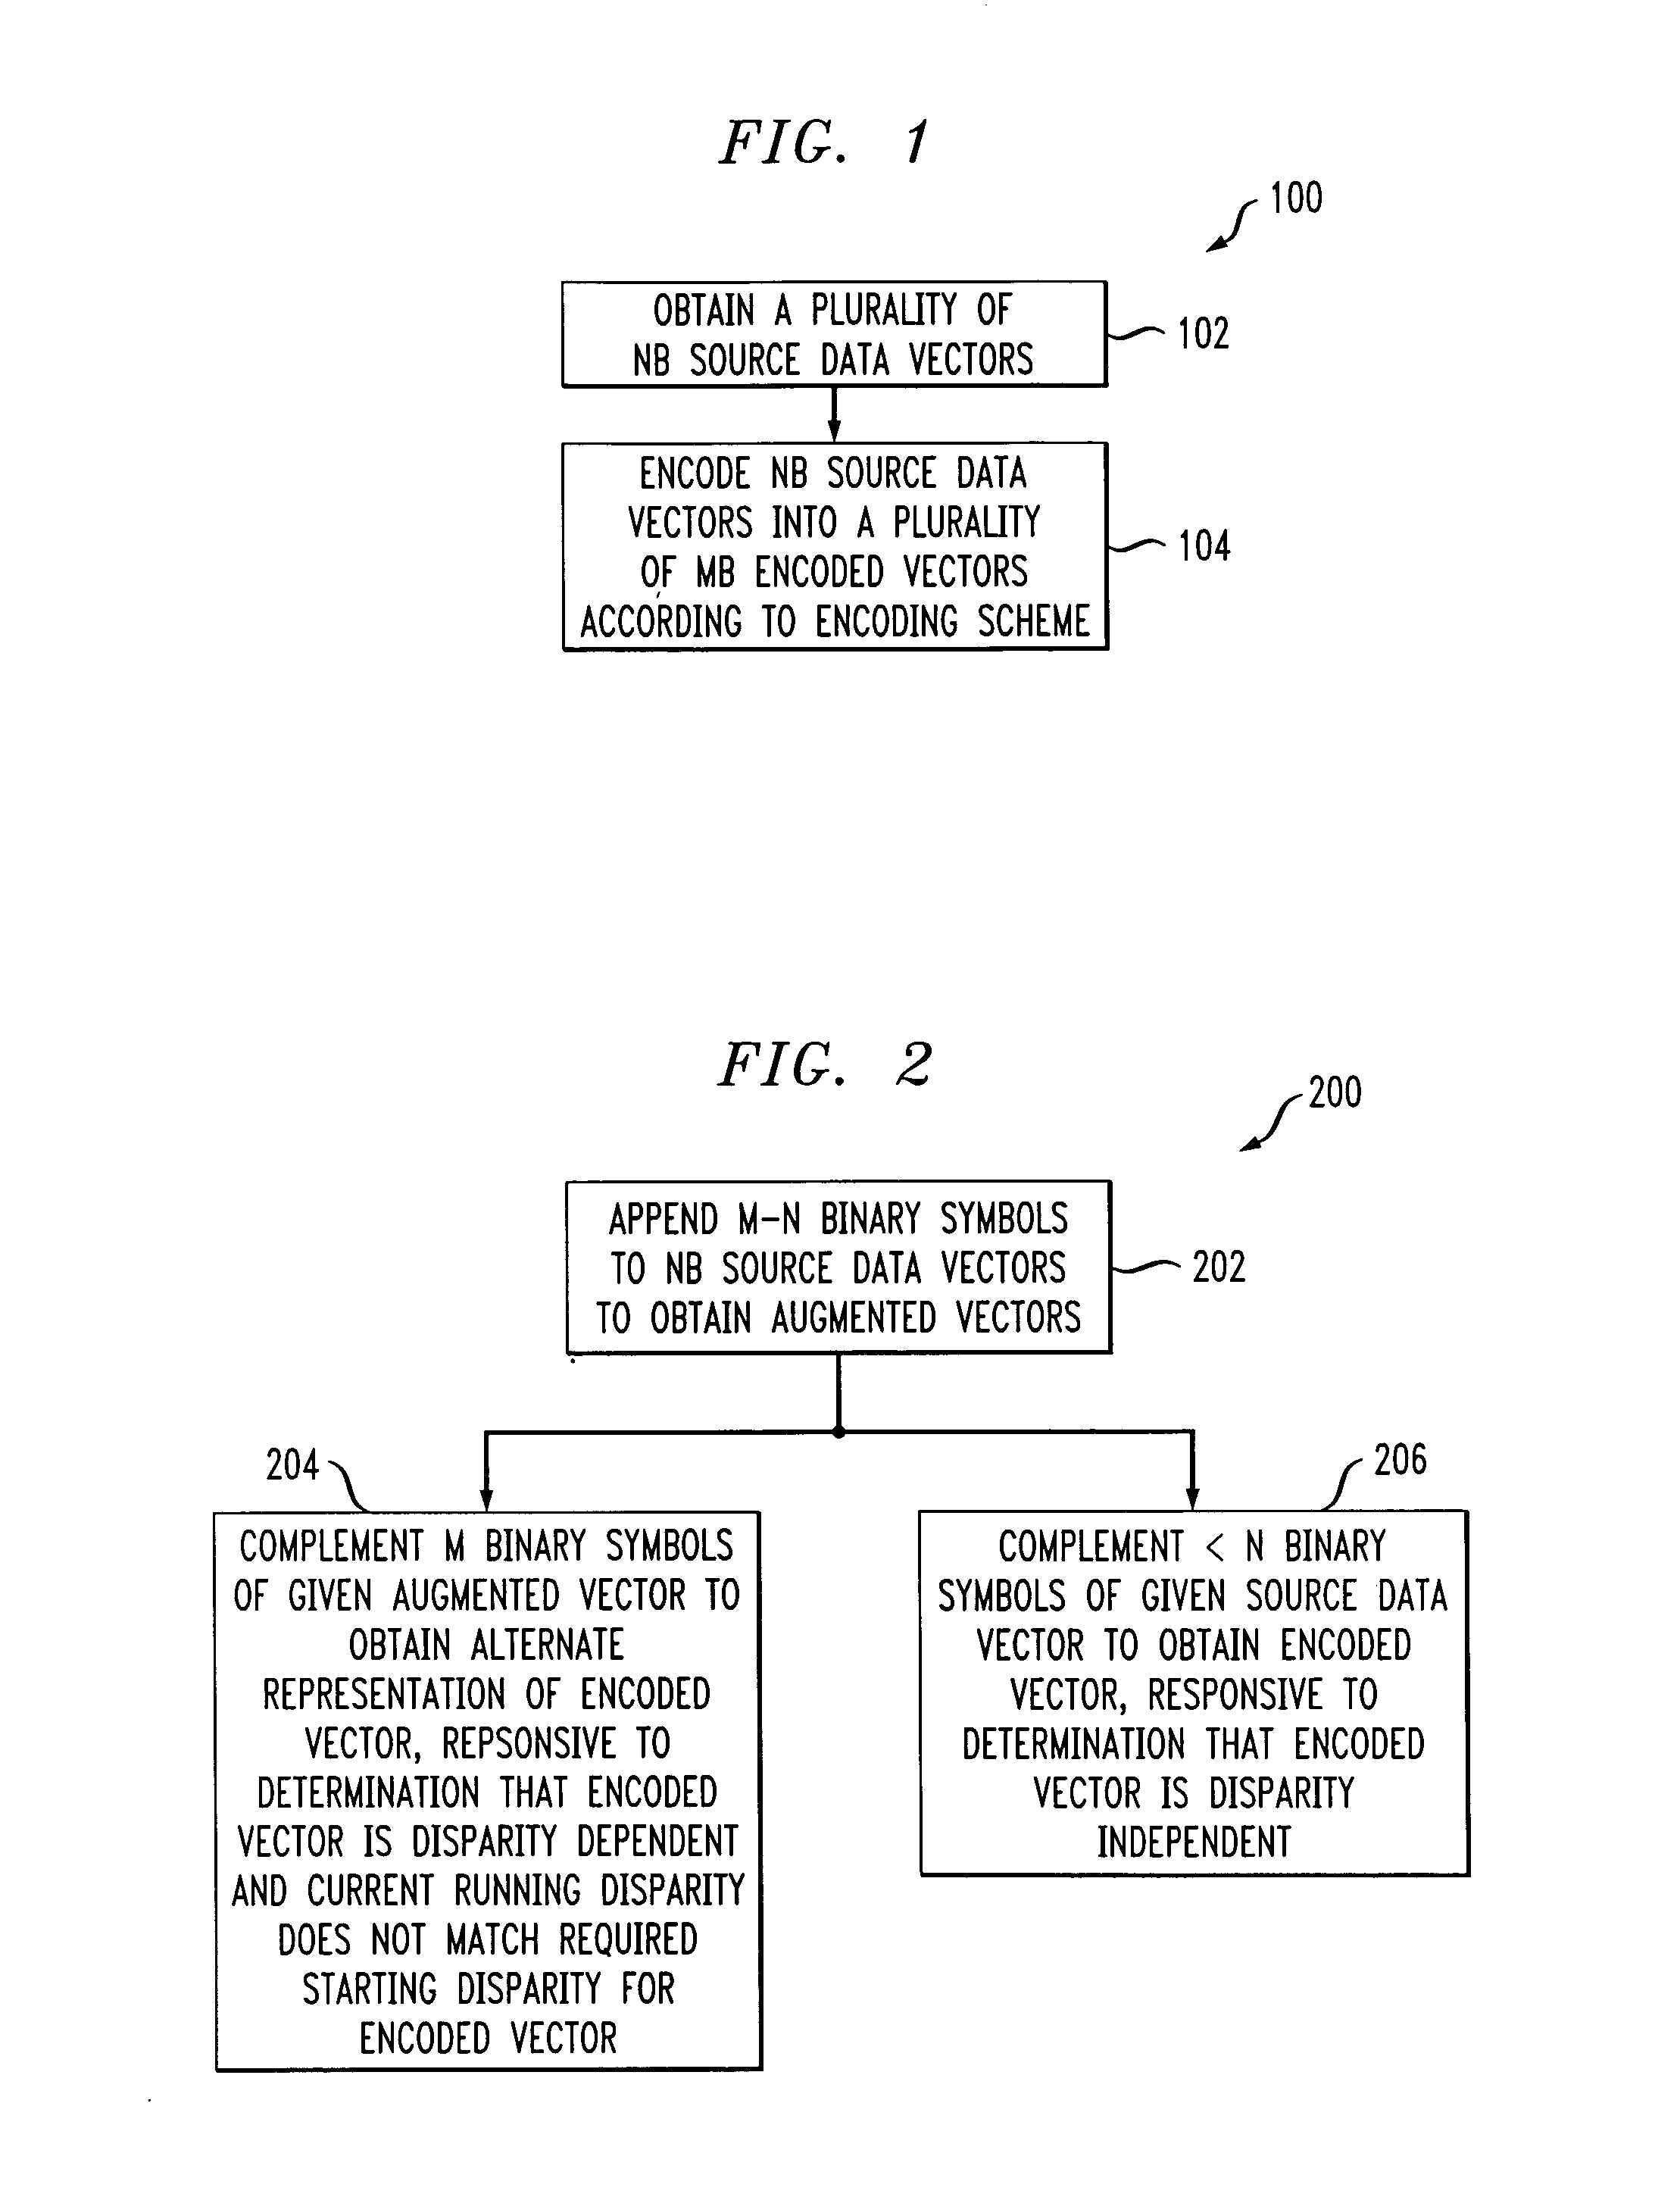 NB/MB coding apparatus and method using both disparity independent and disparity dependent encoded vectors